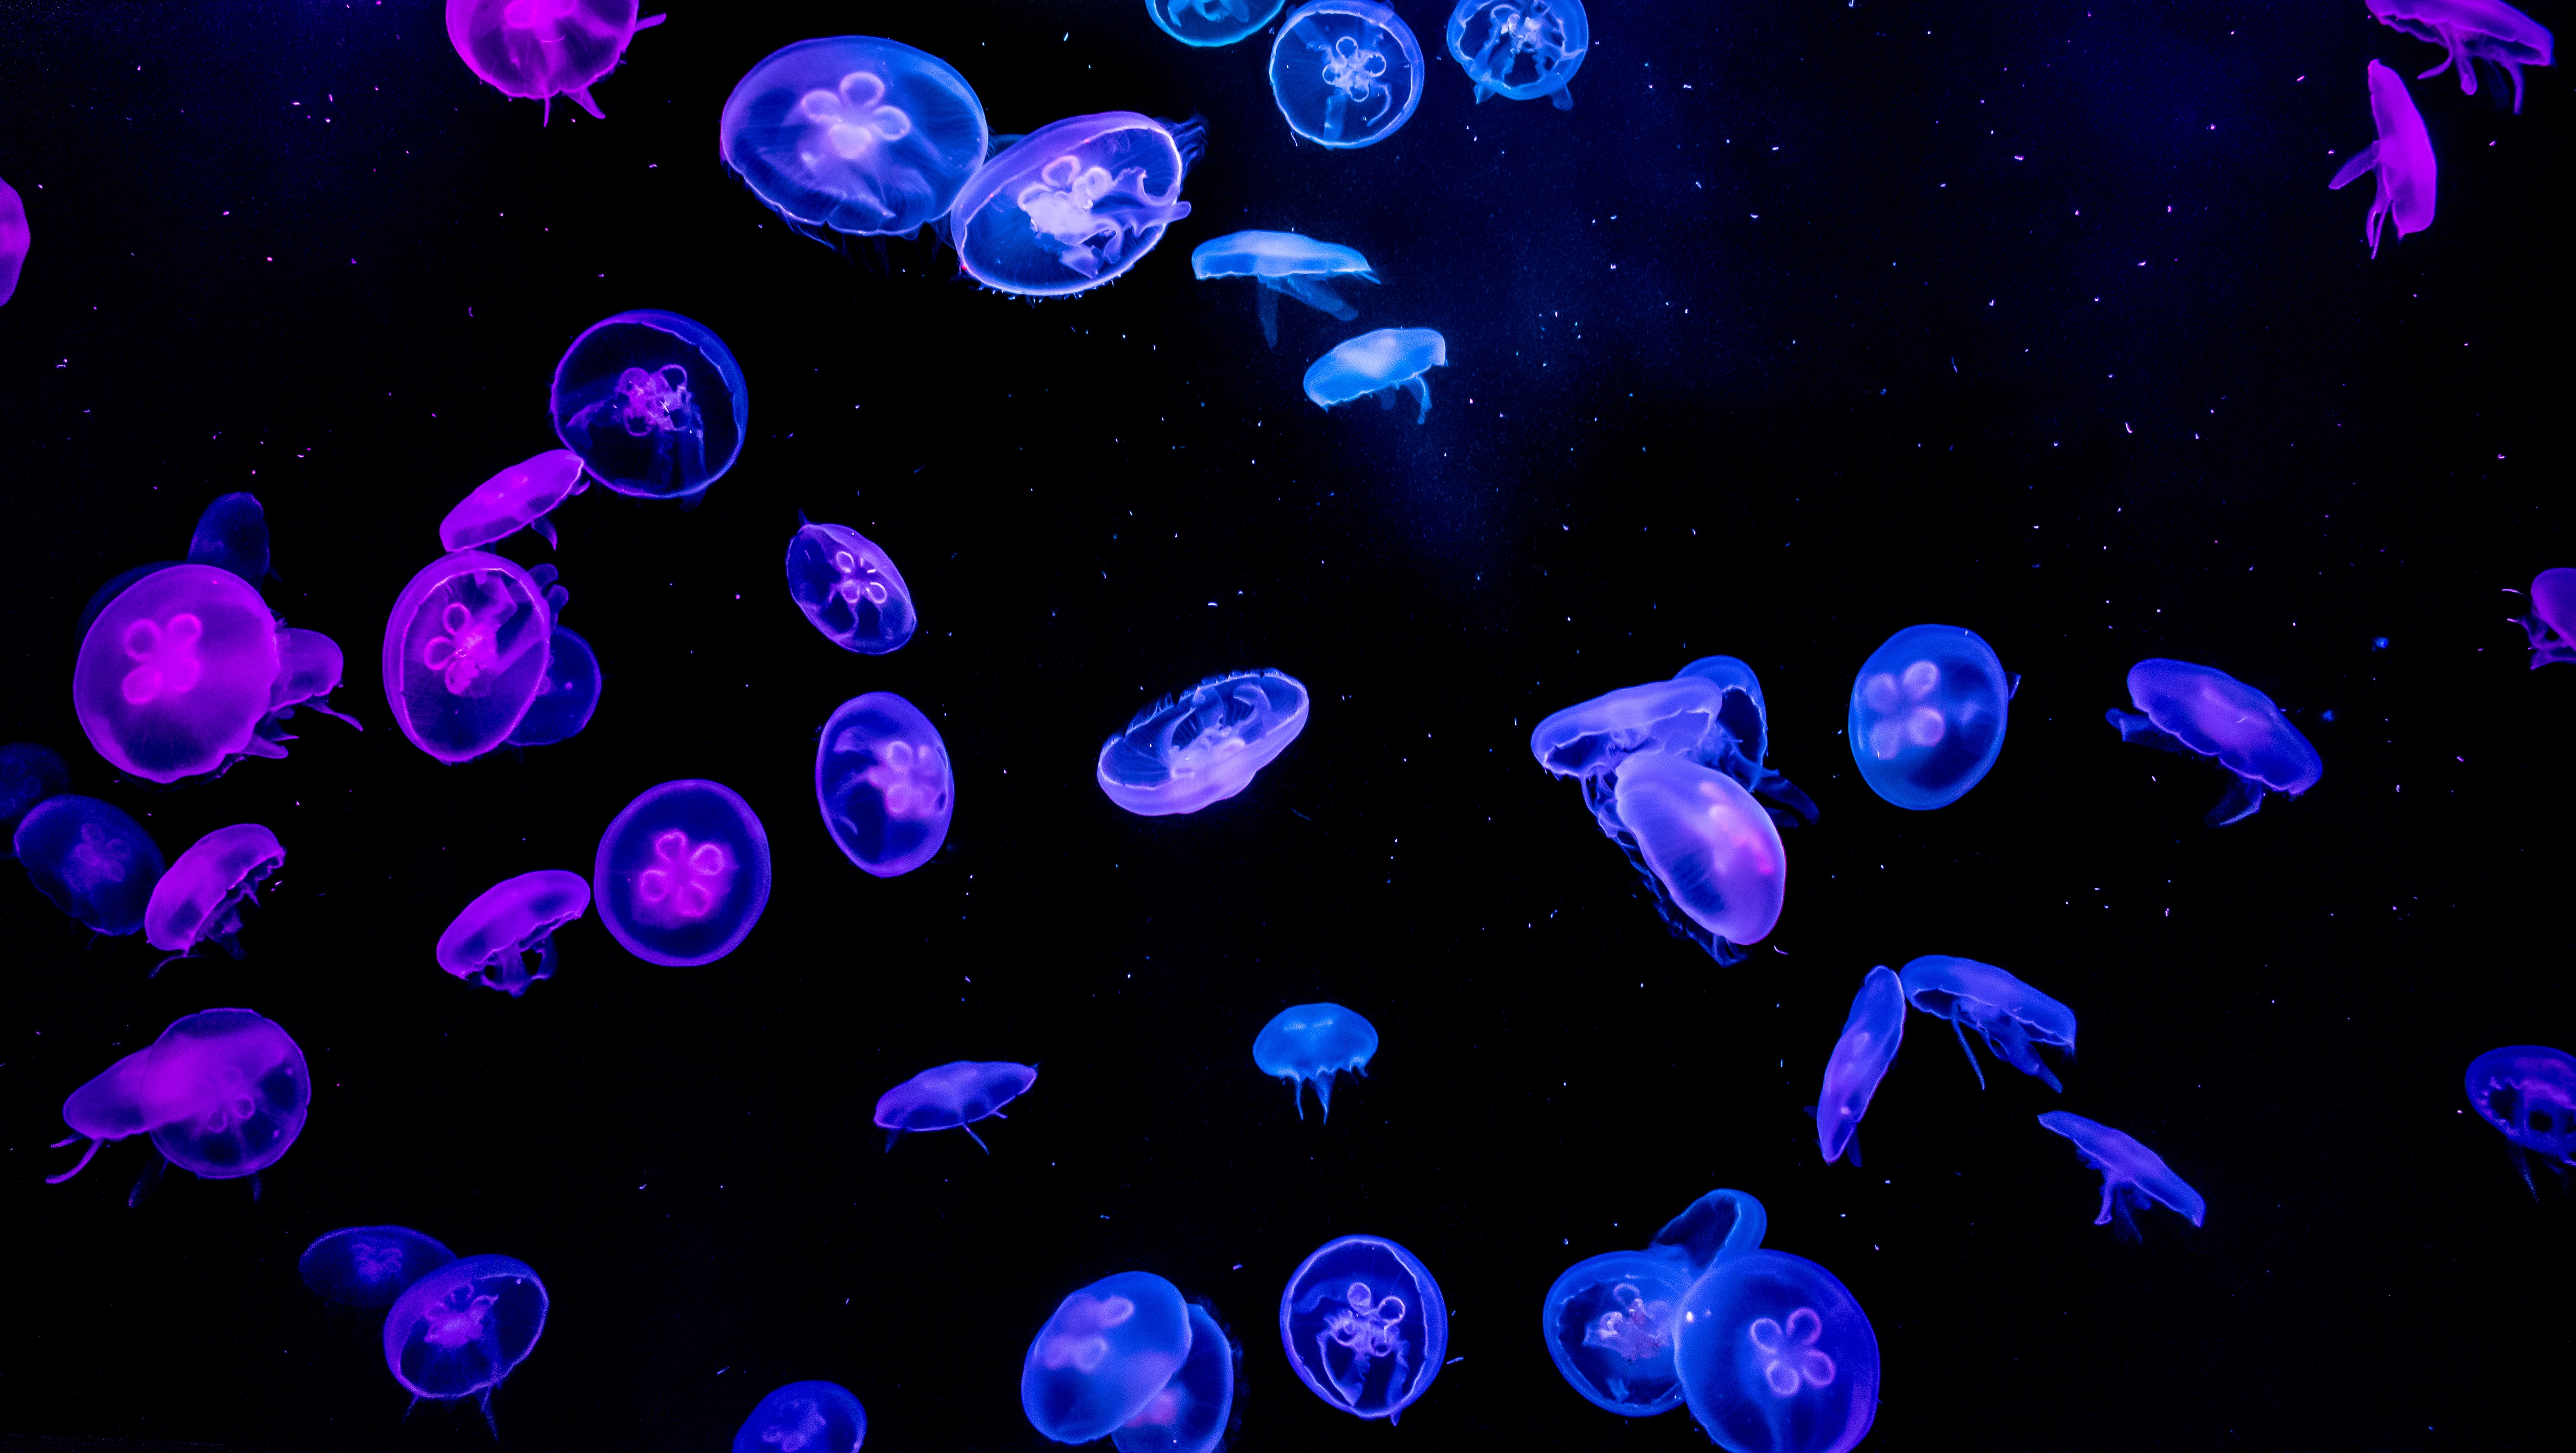 Download Jellyfish wallpaper for mobile phone, free Jellyfish HD picture